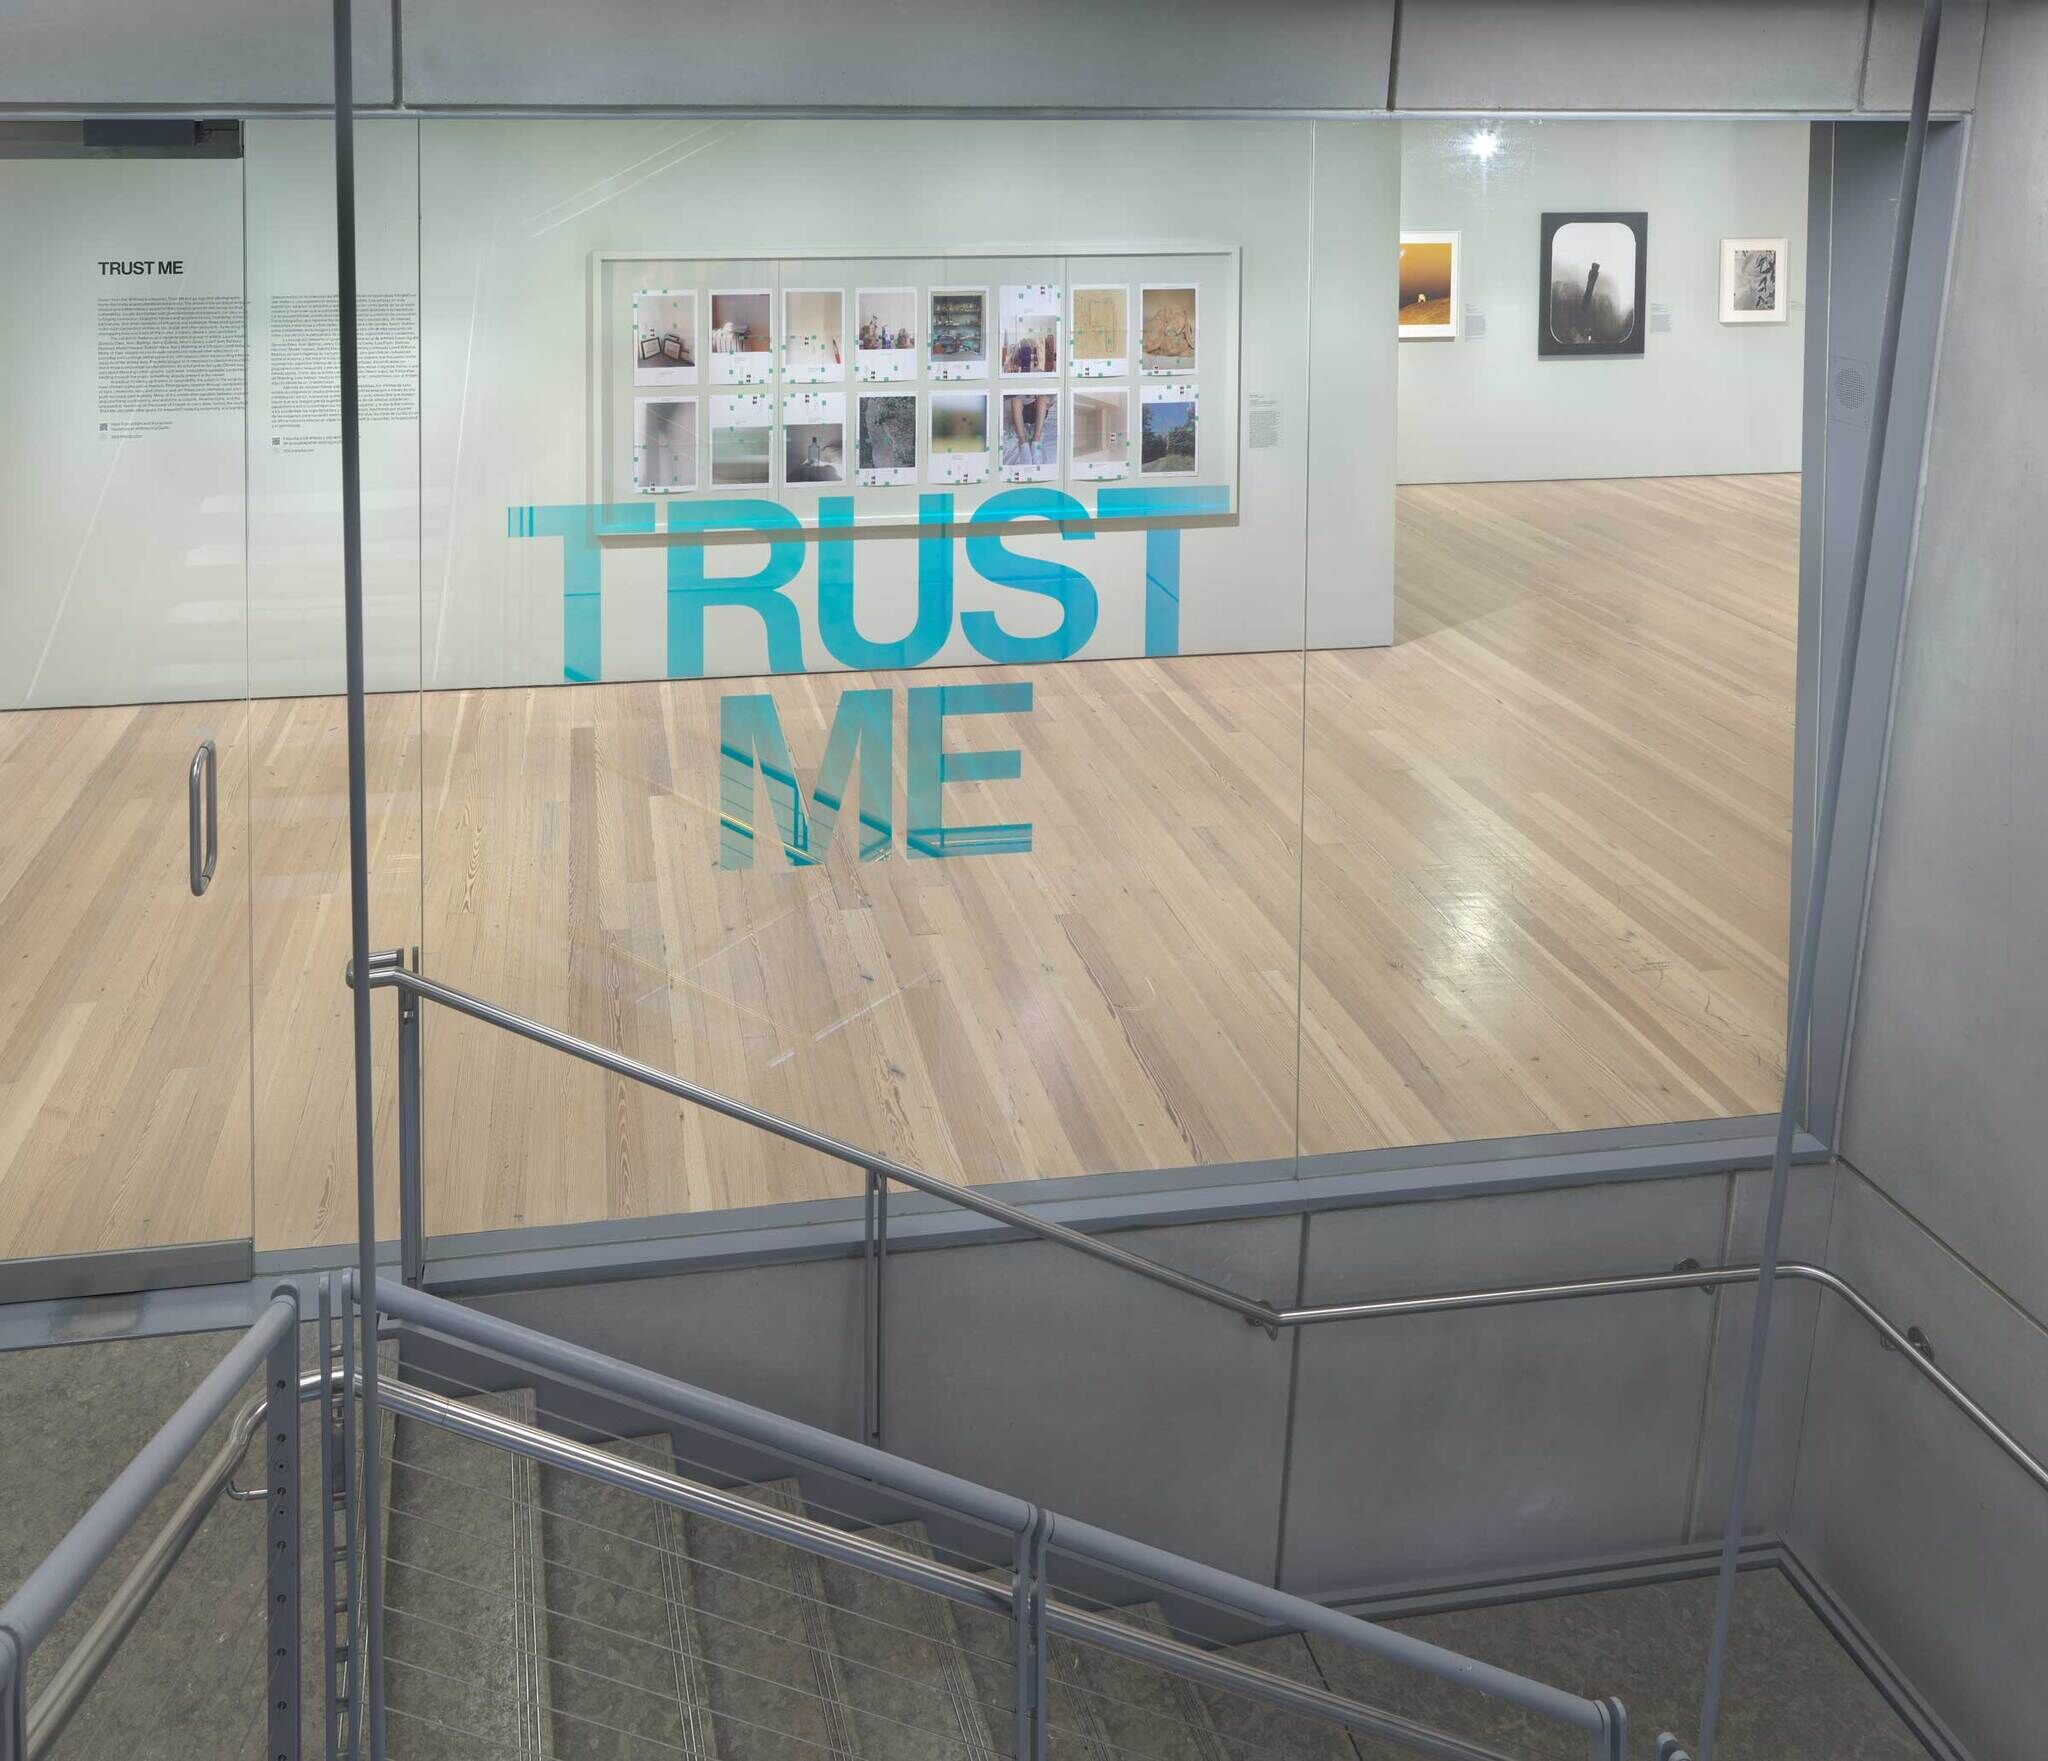 A glass door with the words "Trust Me" in teal and behind the door are various photographs installed.